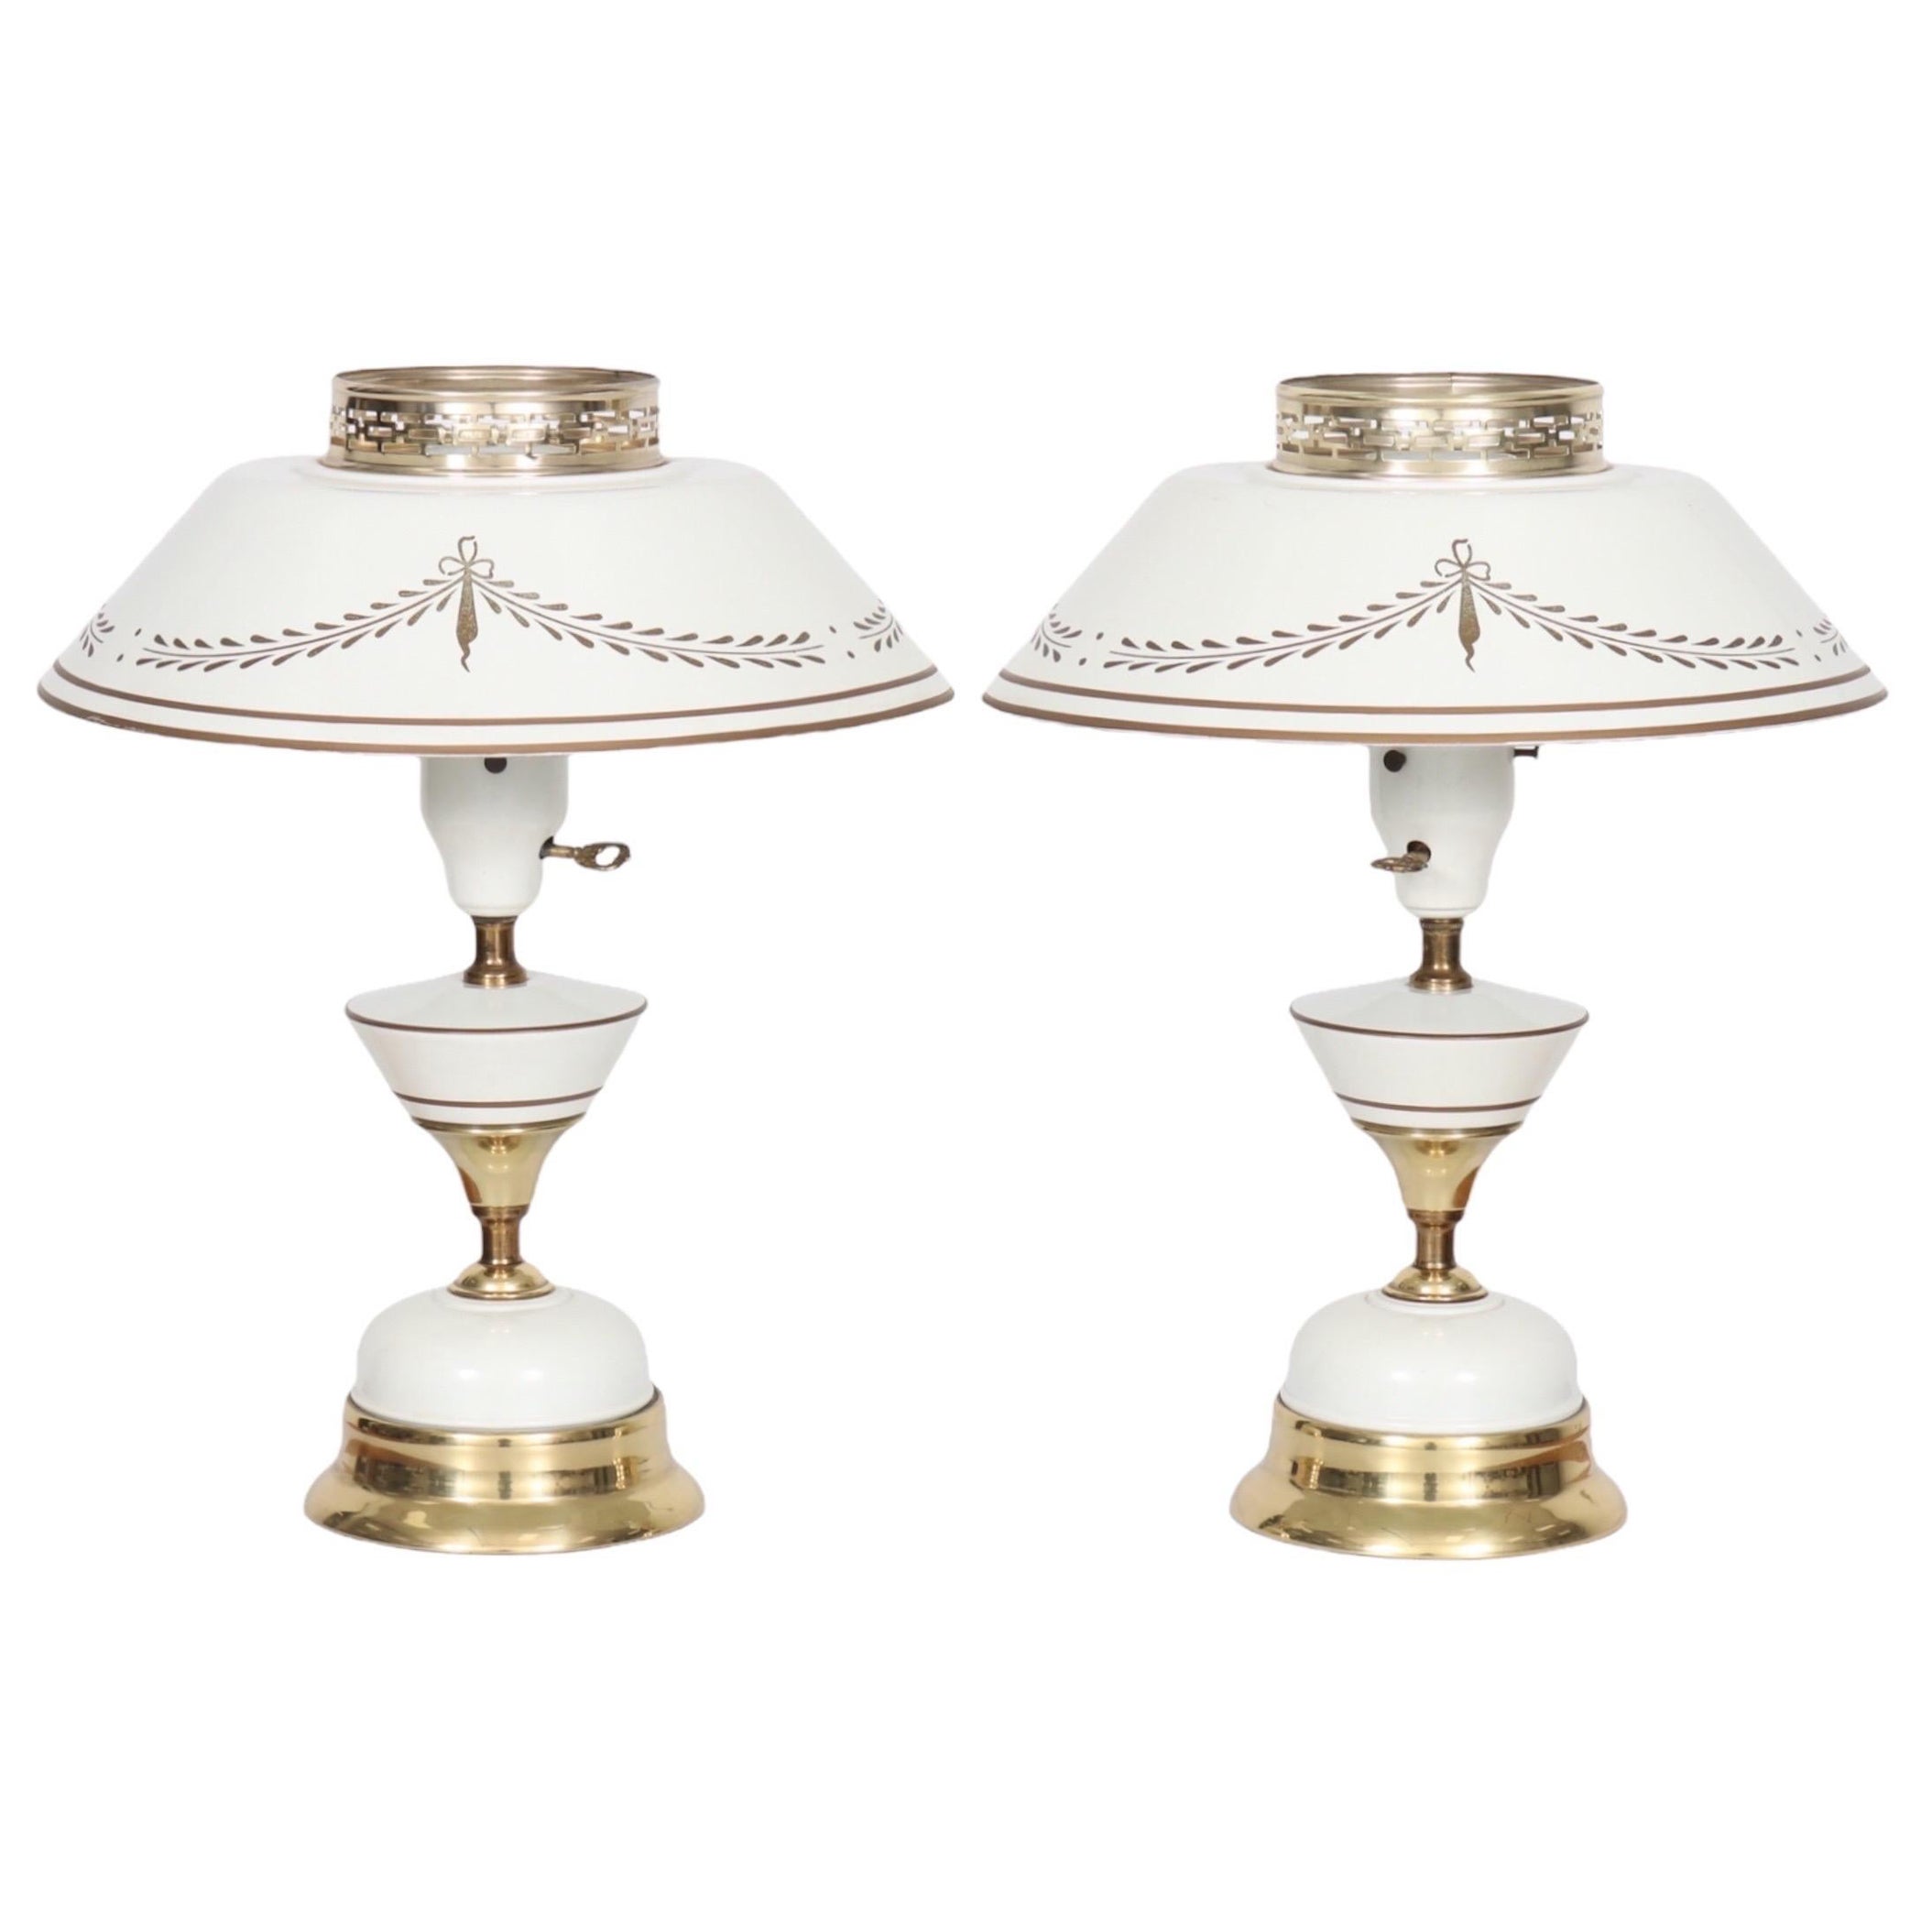 White & Gold Regency Table Lamps, a Pair For Sale